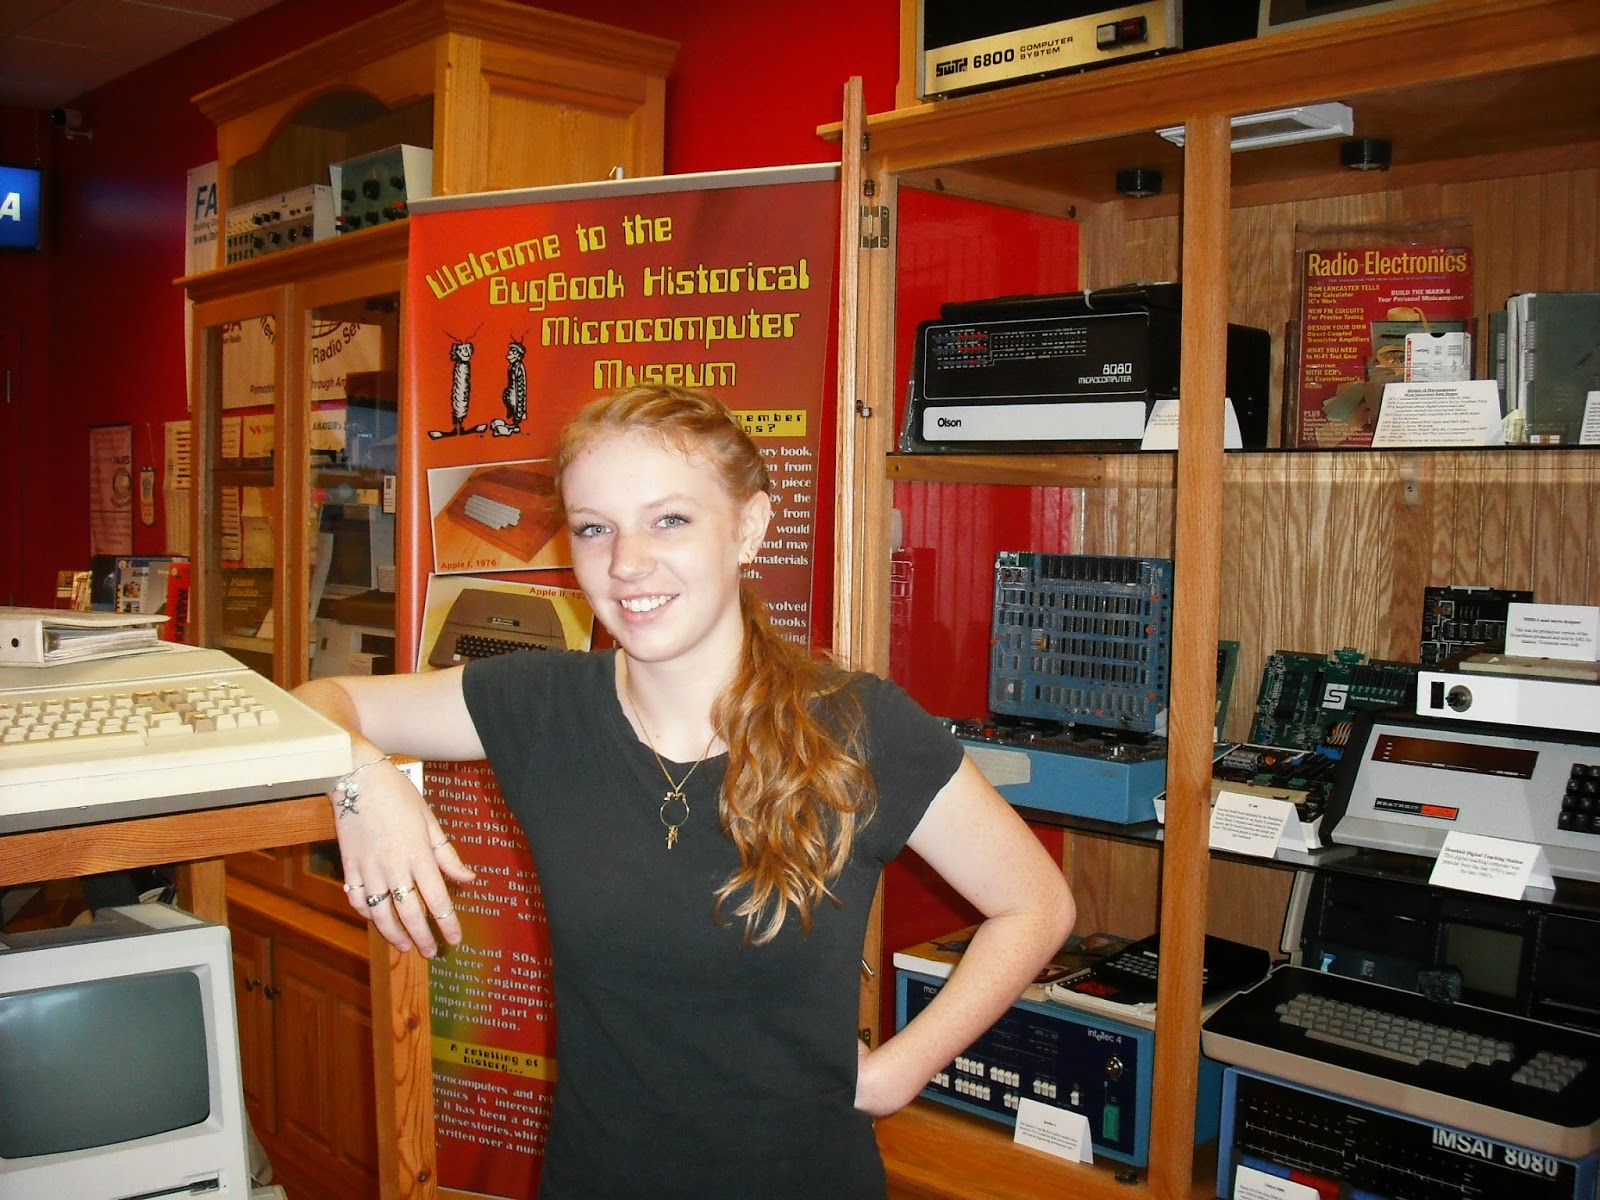 Bugbook Historical Microcomputer Museum